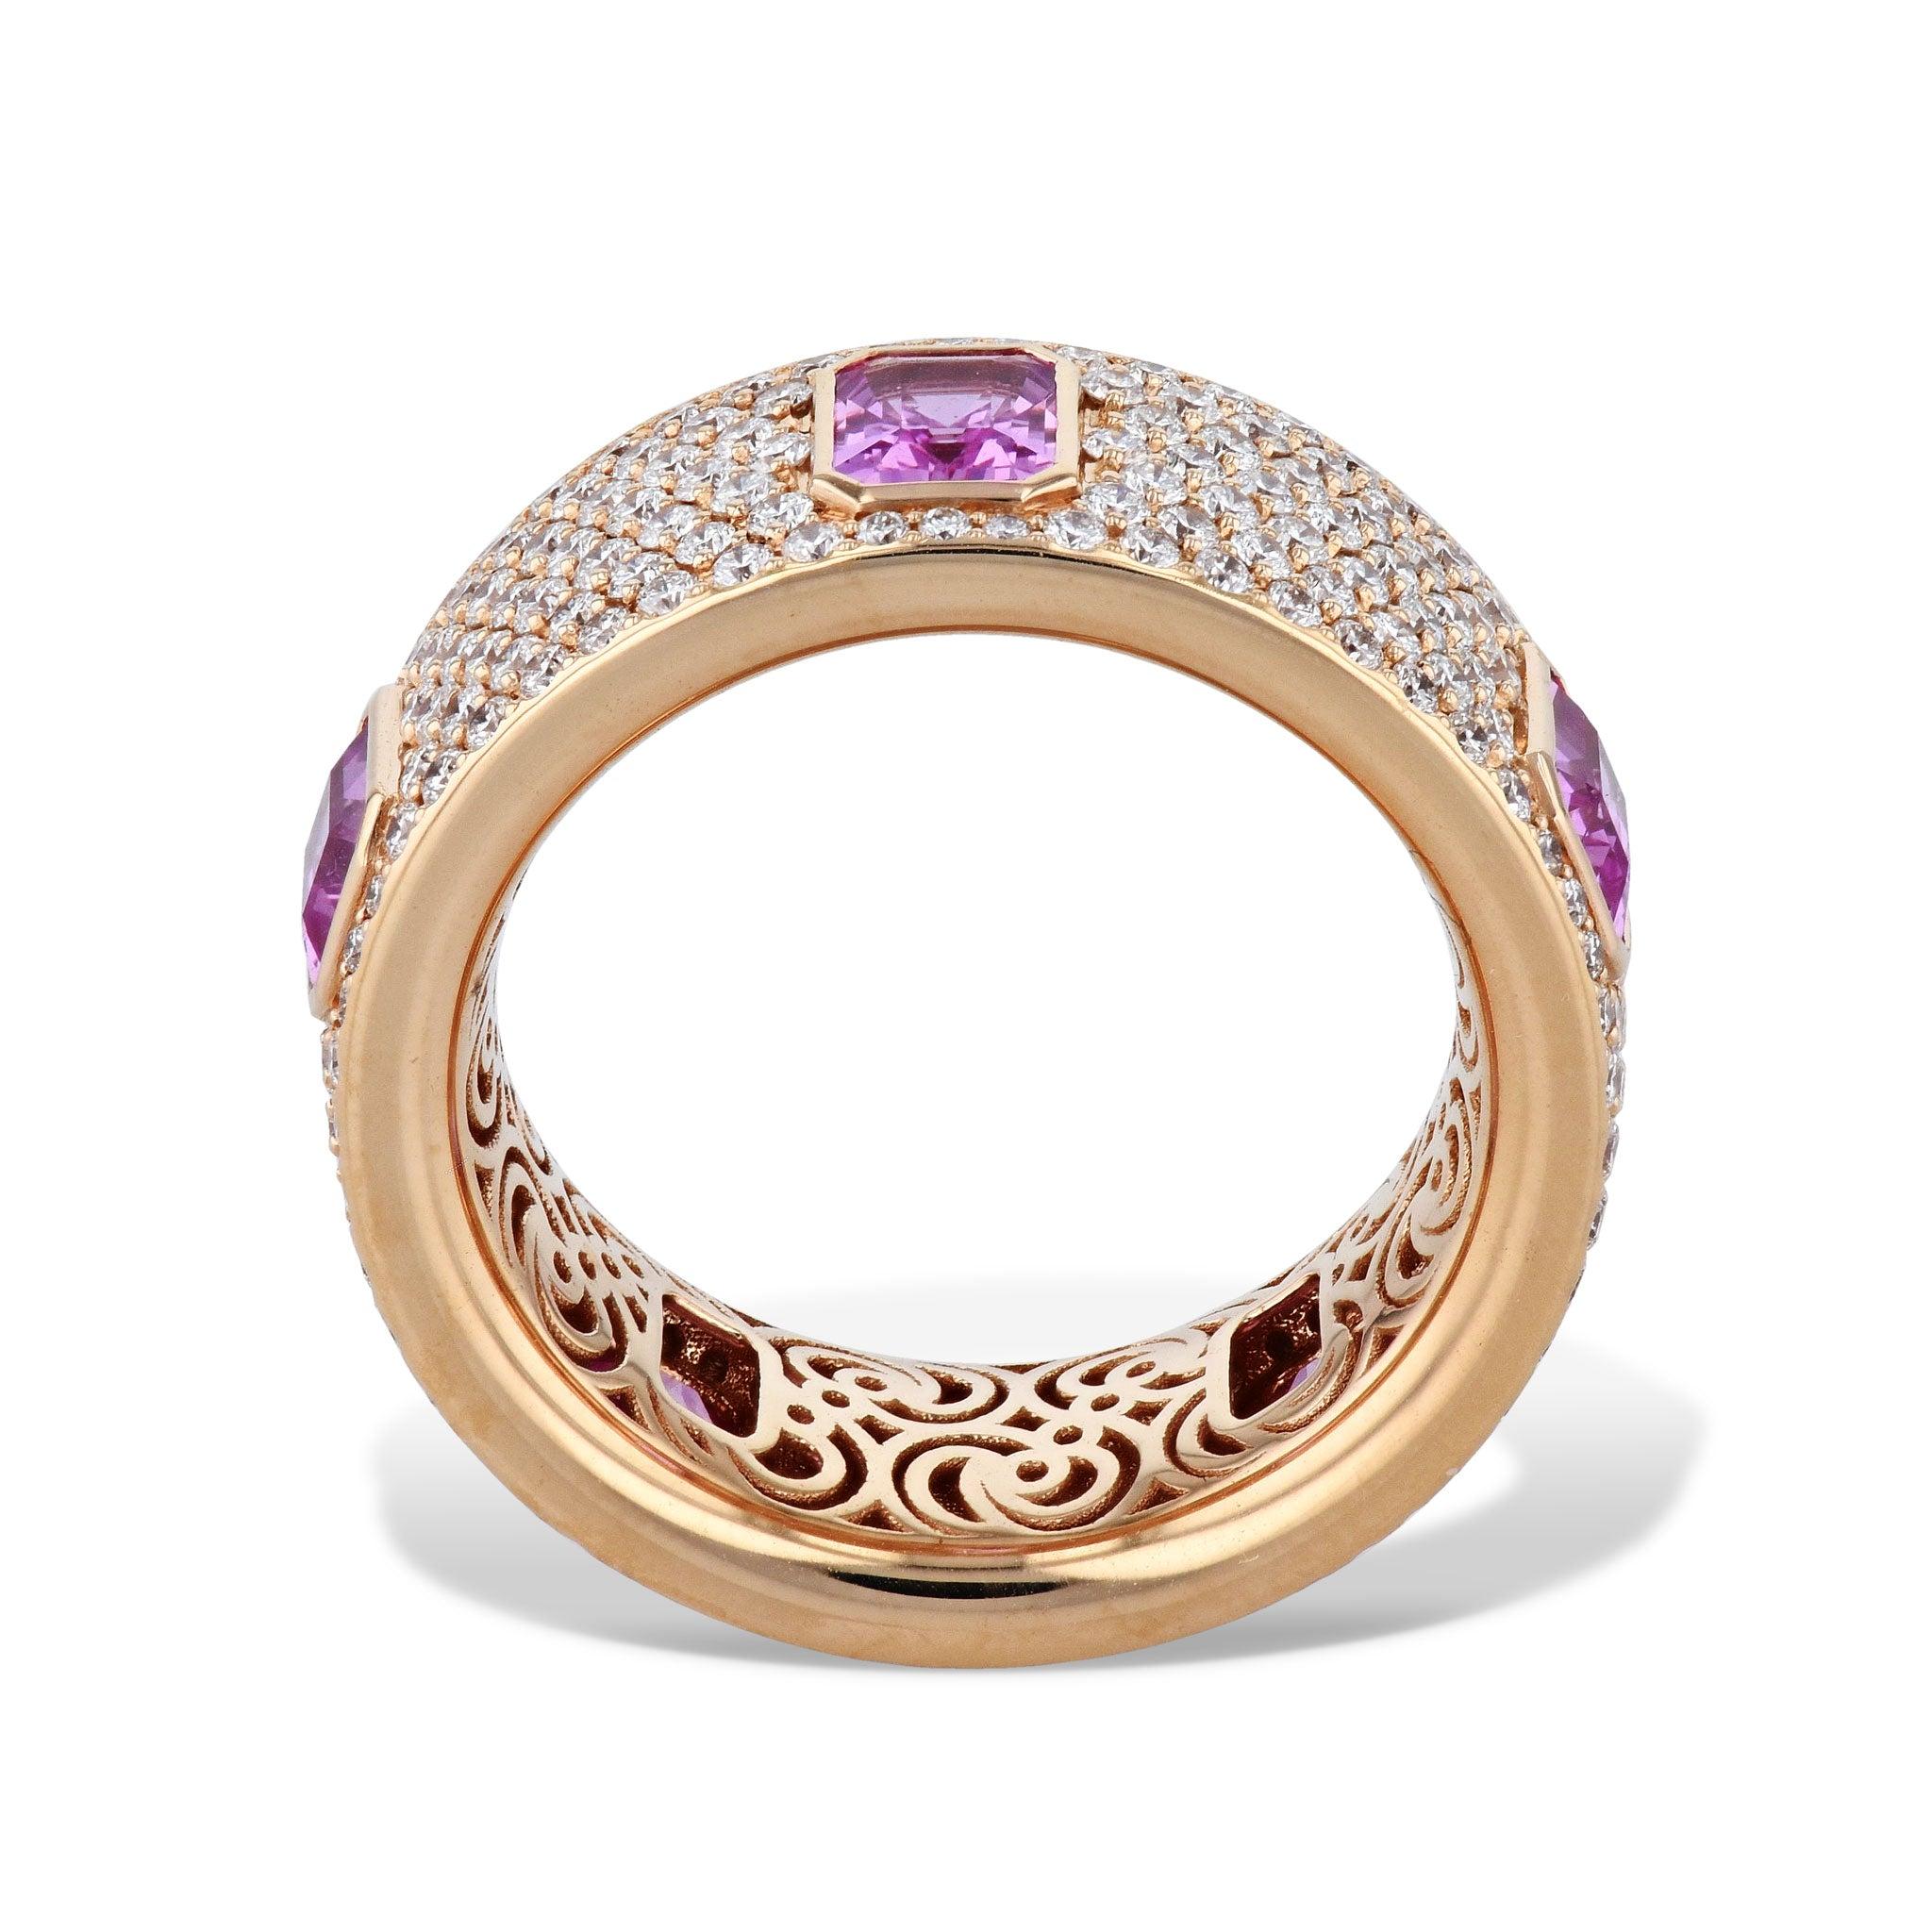 This exquisite Pink Sapphire Diamond Pave 18K Pink Gold Ring will add a sparkle to any occasion. It is crafted from pink sapphire and 1.97ct of F-VS diamond pave set in 18 karat rose gold.  
Pink  Sapphire Diamond Pave Ring.
2.54ct Pink